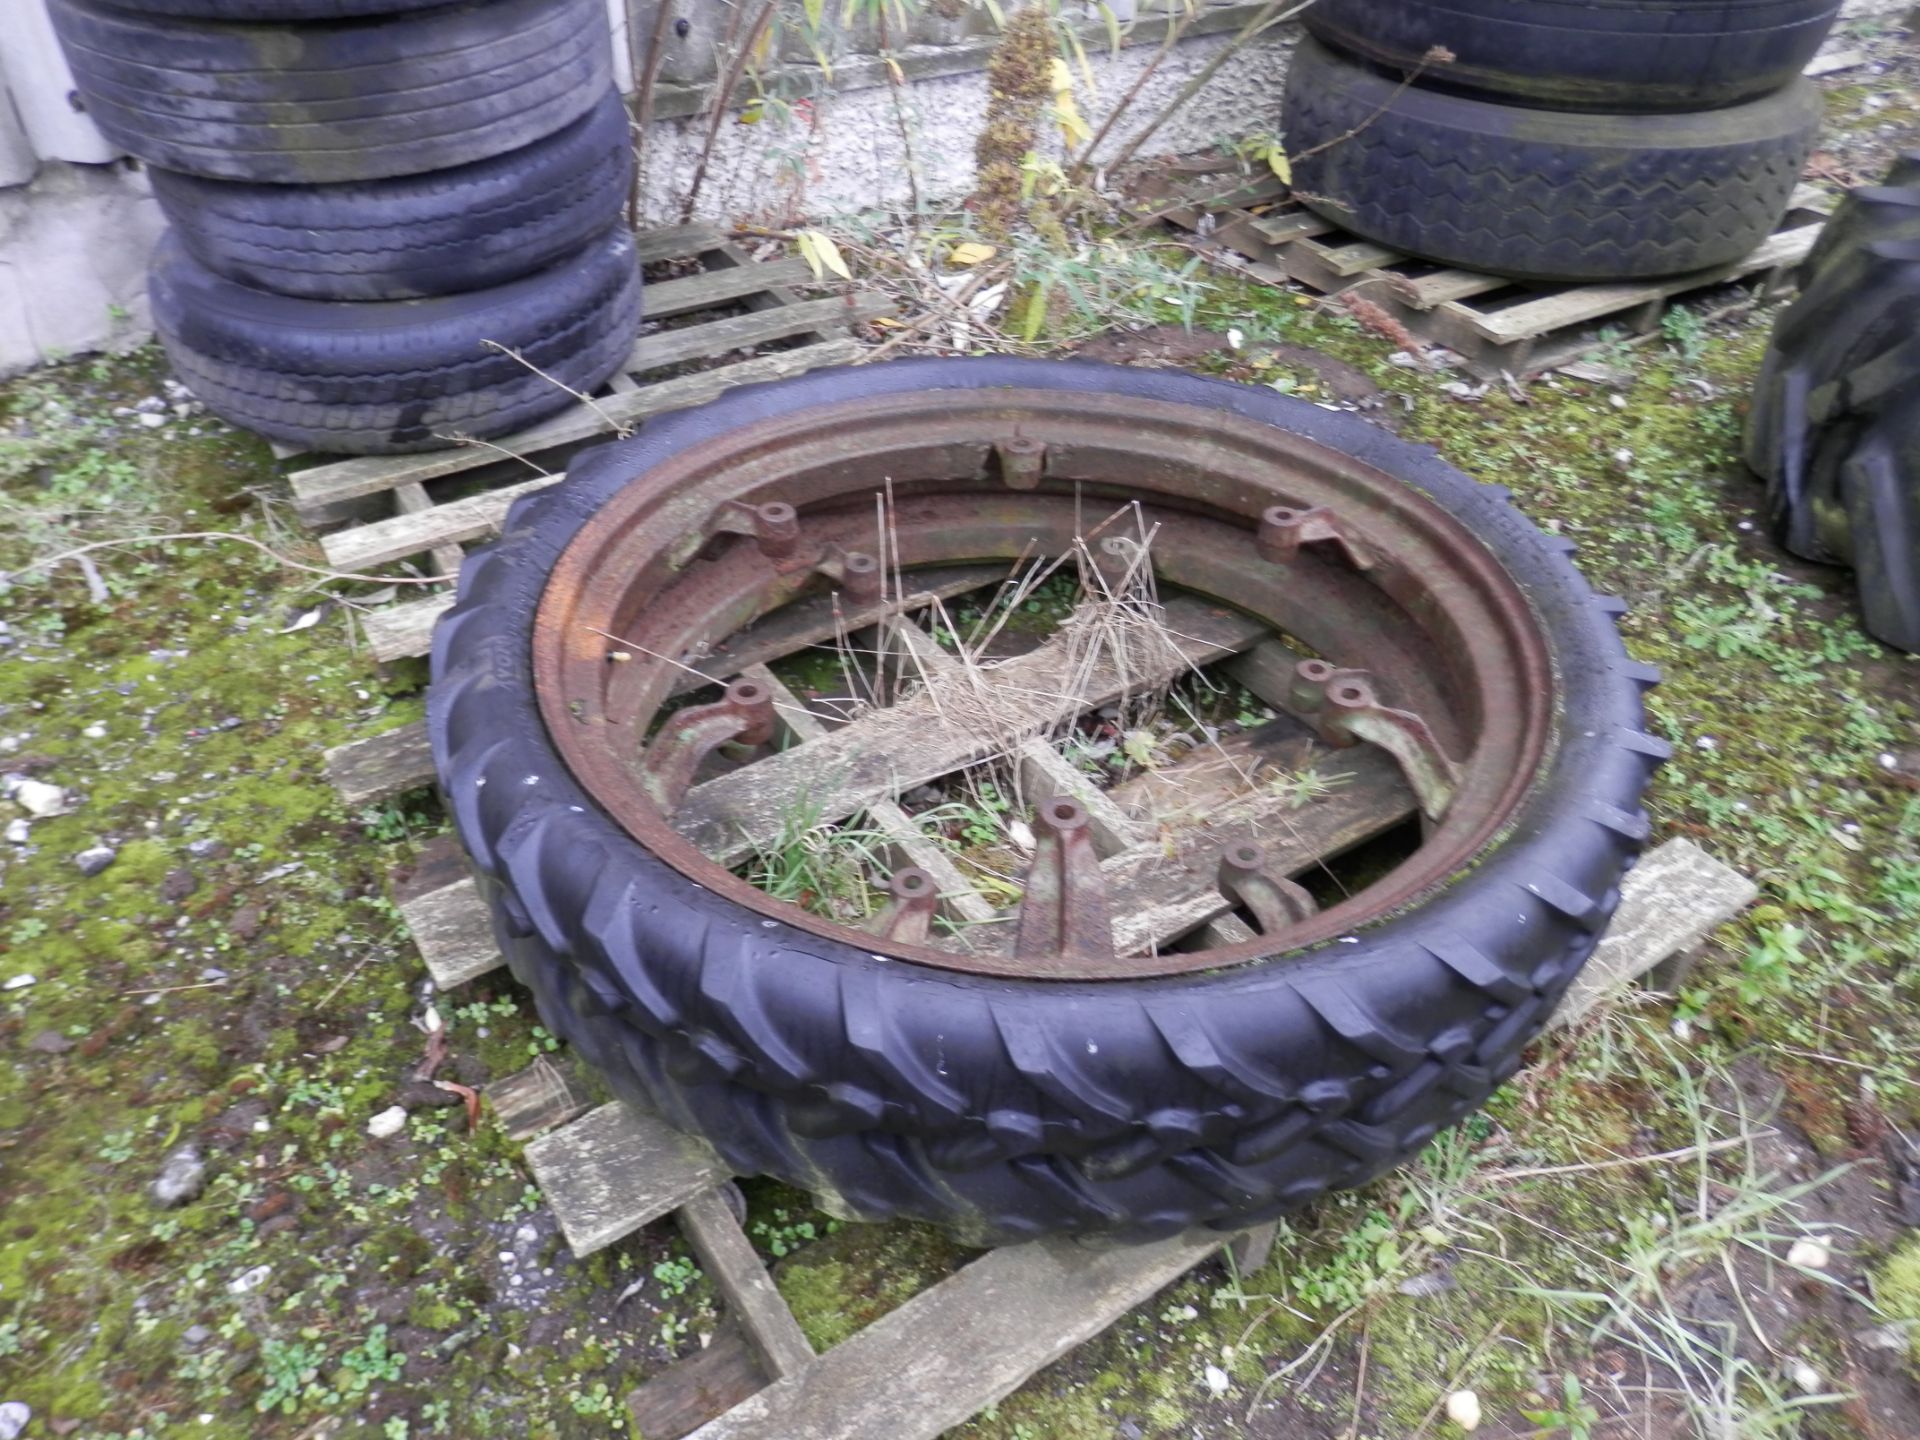 85 + ASSORTED LORRY, CAR & TRAILER TYRES & WHEELS, AS PICTURED. BUYER TO COLLECT COMPLETE JOBLOT. - Image 5 of 10